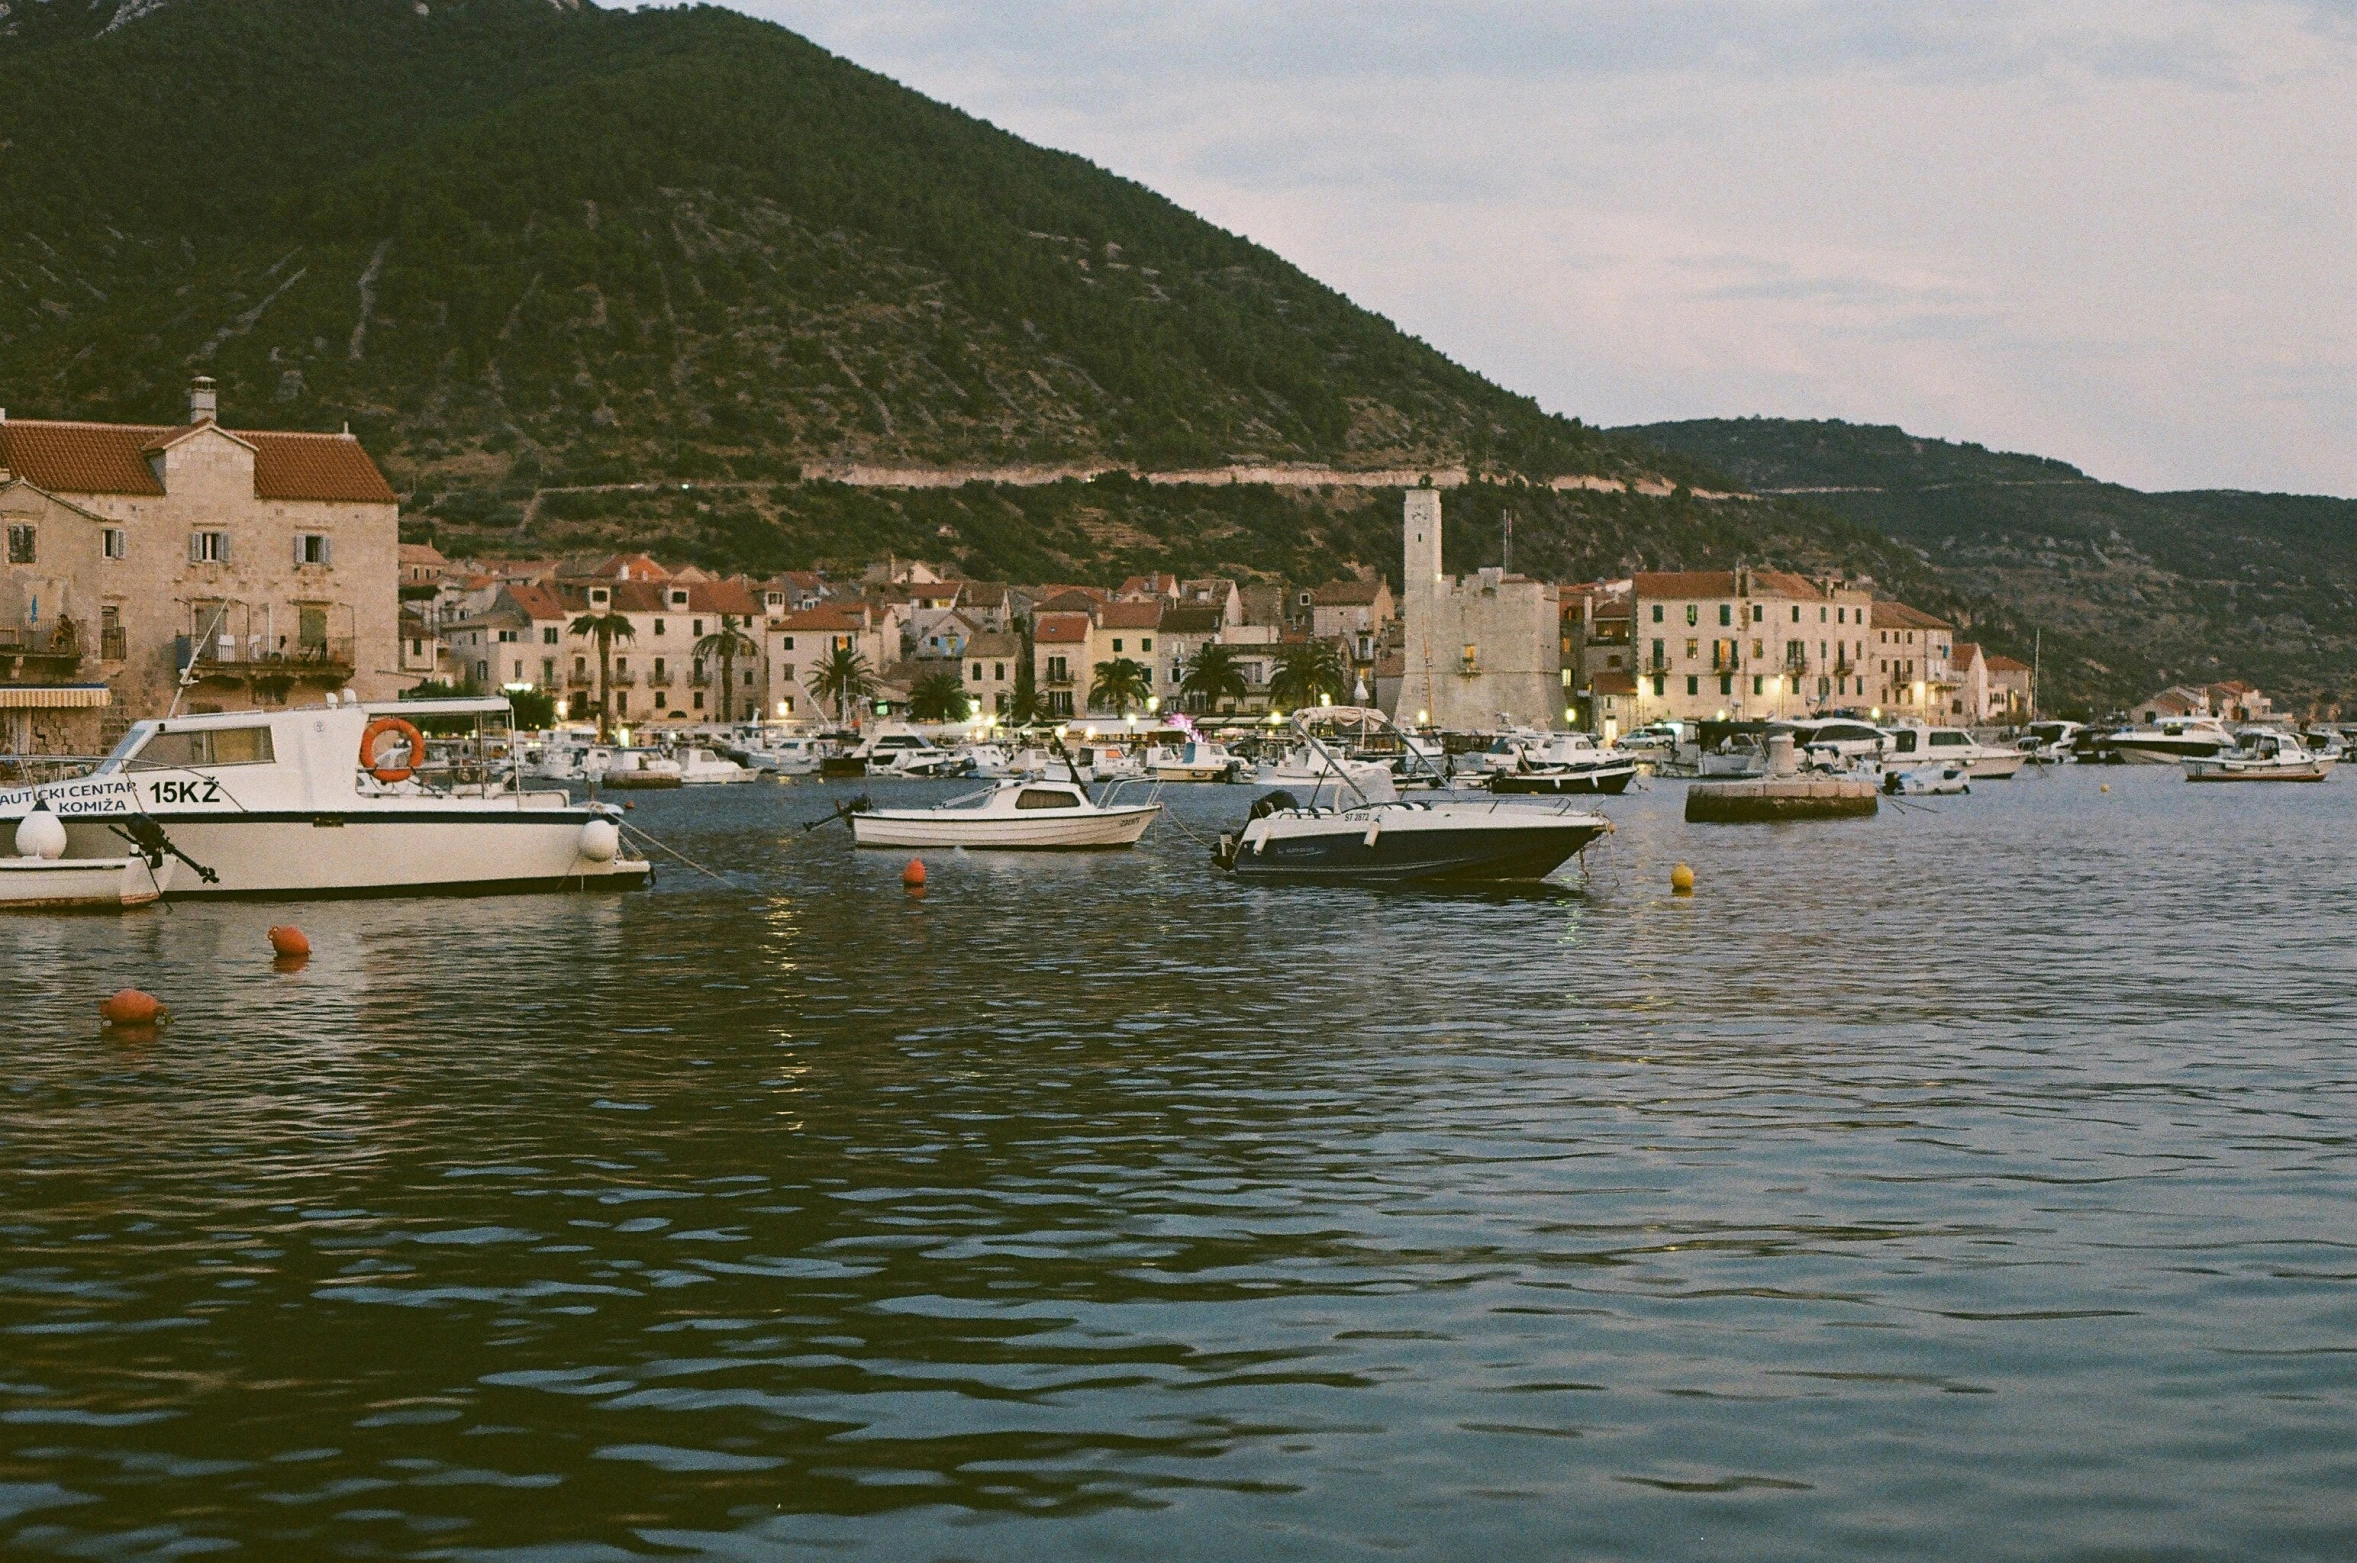 some boats parked in a harbor next to a mountain